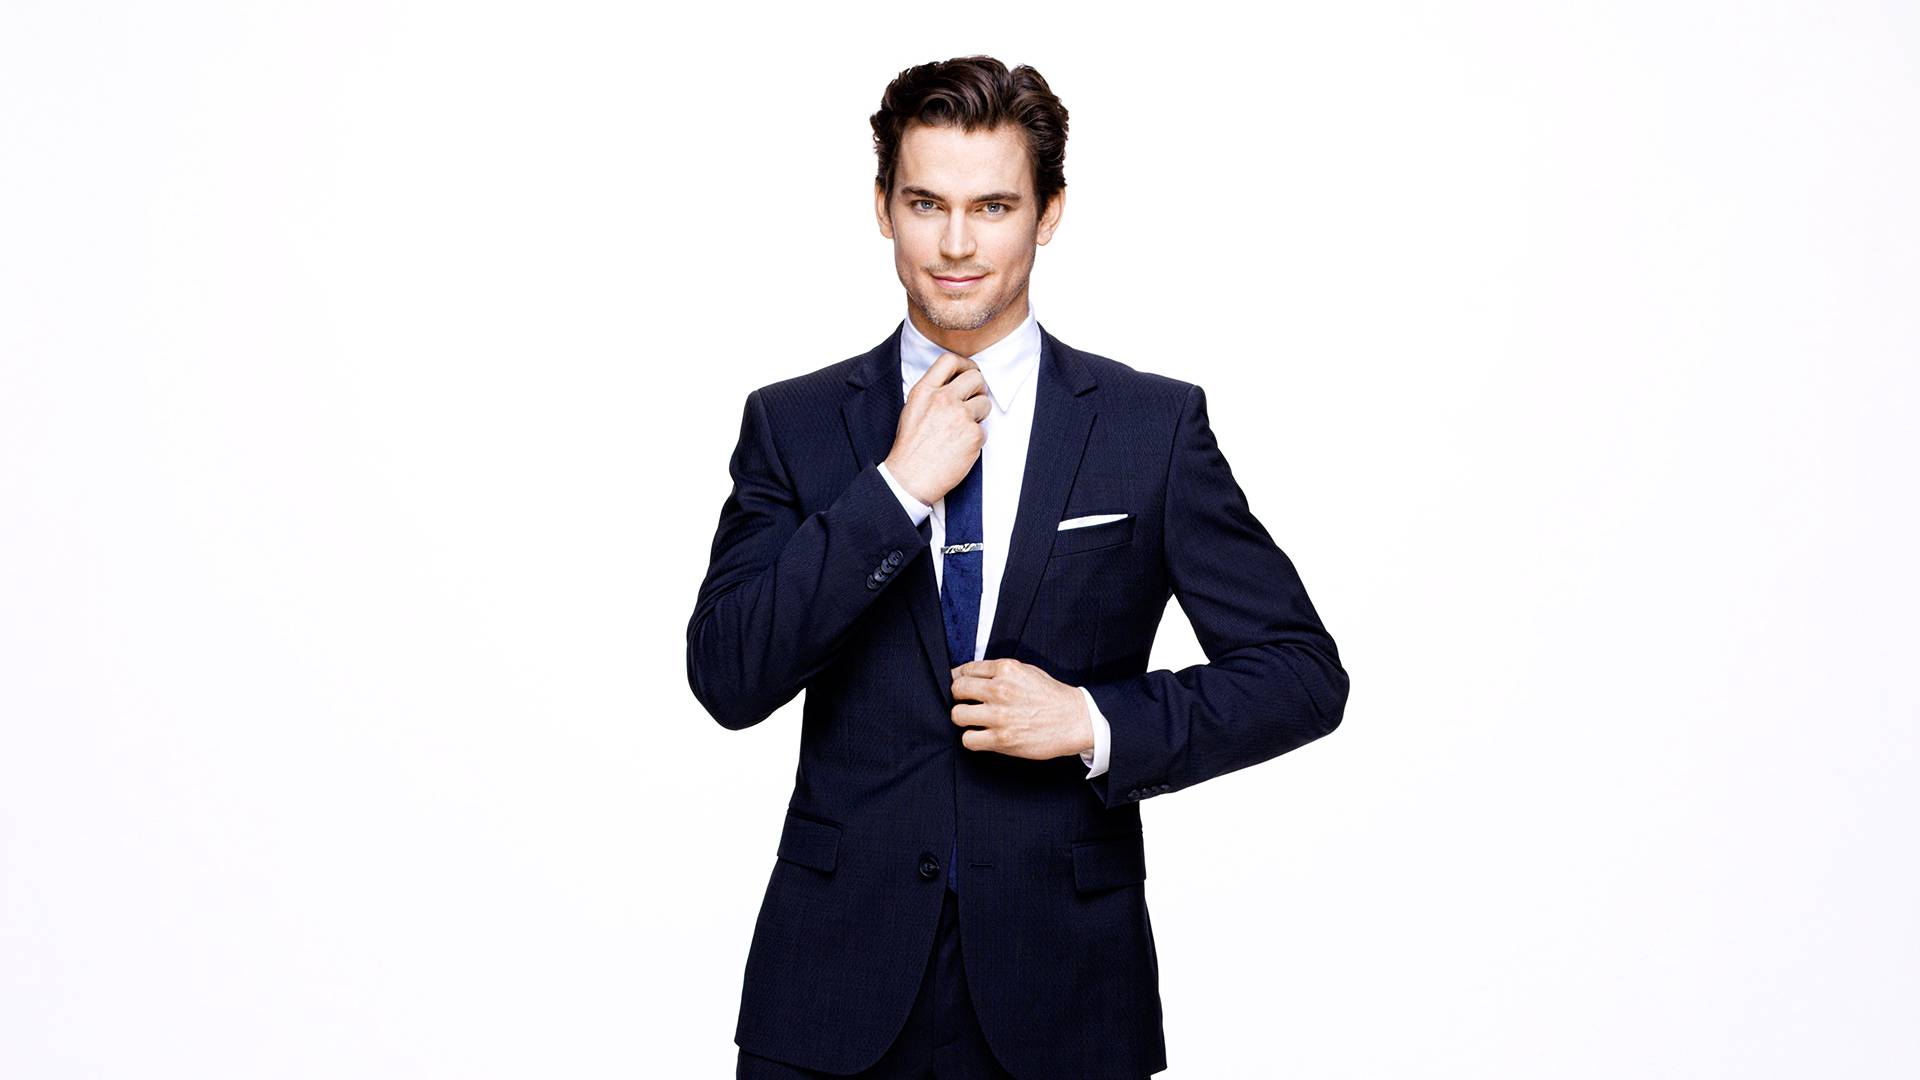 The finer fashion of 'White Collar's Neal Caffrey